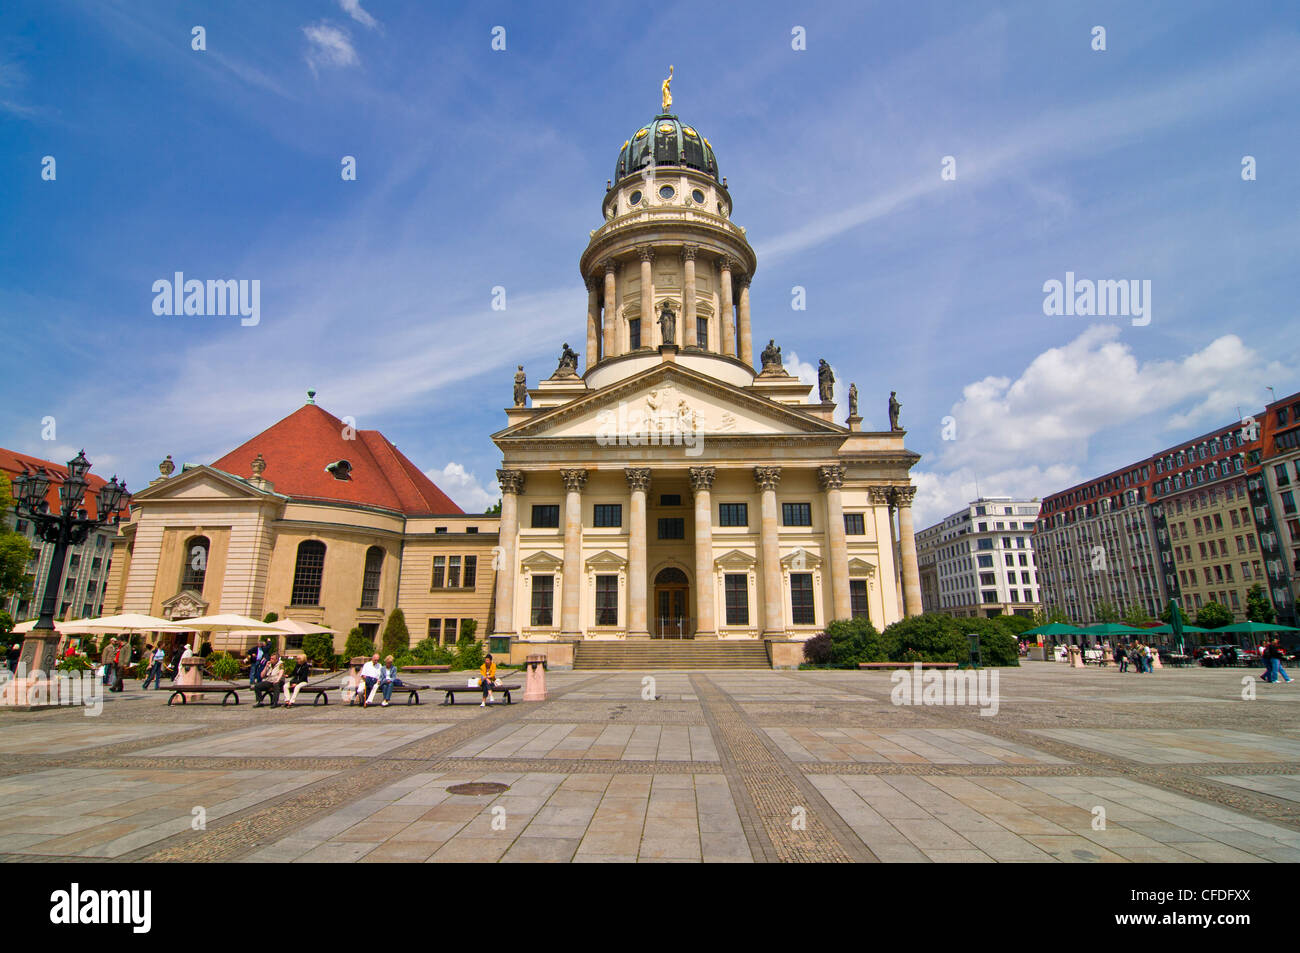 The Berlin Gendarmenmarkt, site of the Konzerthaus and the French and German Cathedrals, Berlin, Germany, Europe Stock Photo